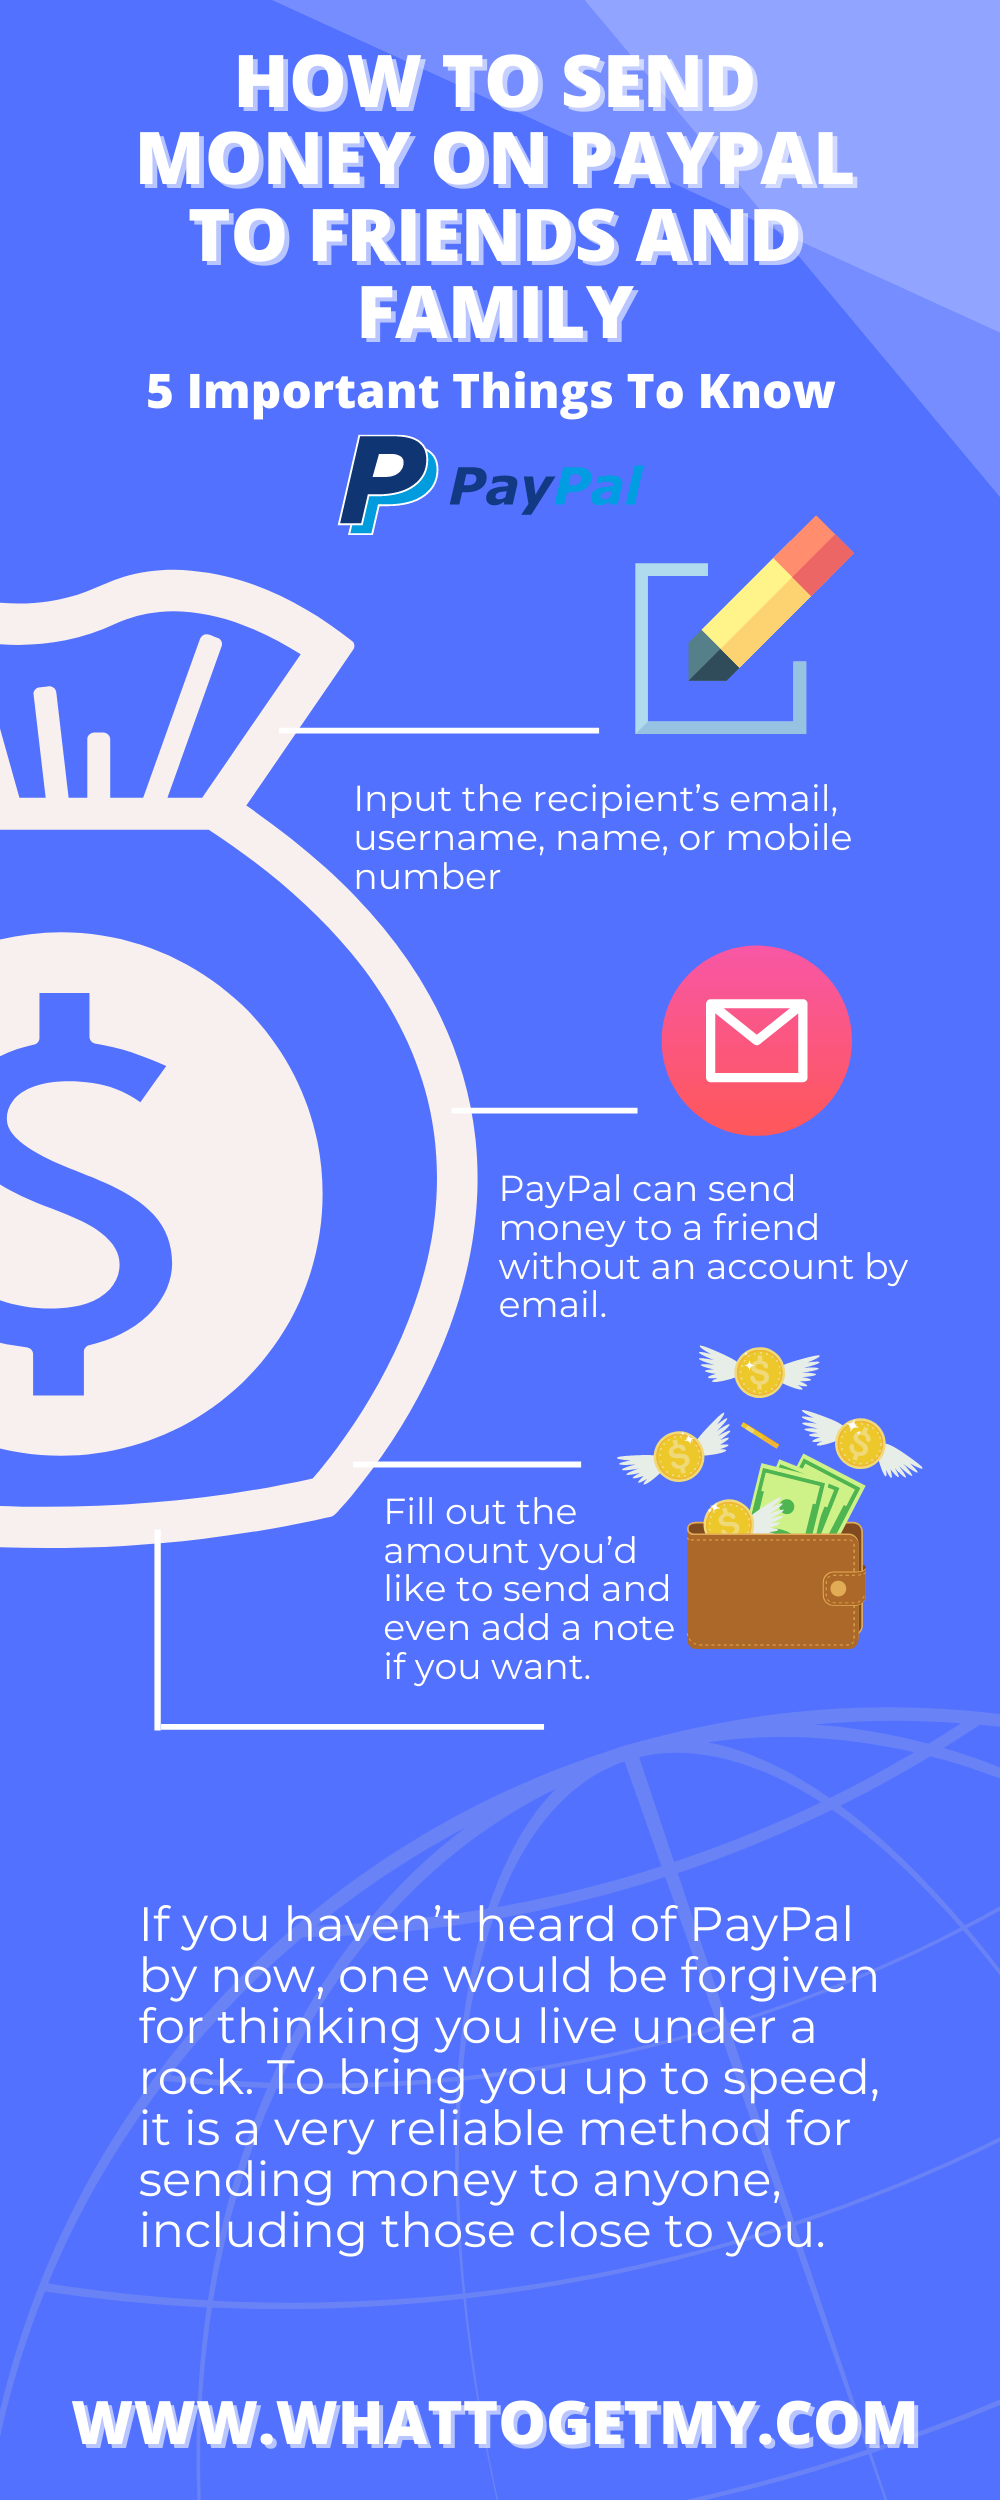 HOW TO SEND MONEY ON PAYPAL TO FRIENDS AND FAMILY